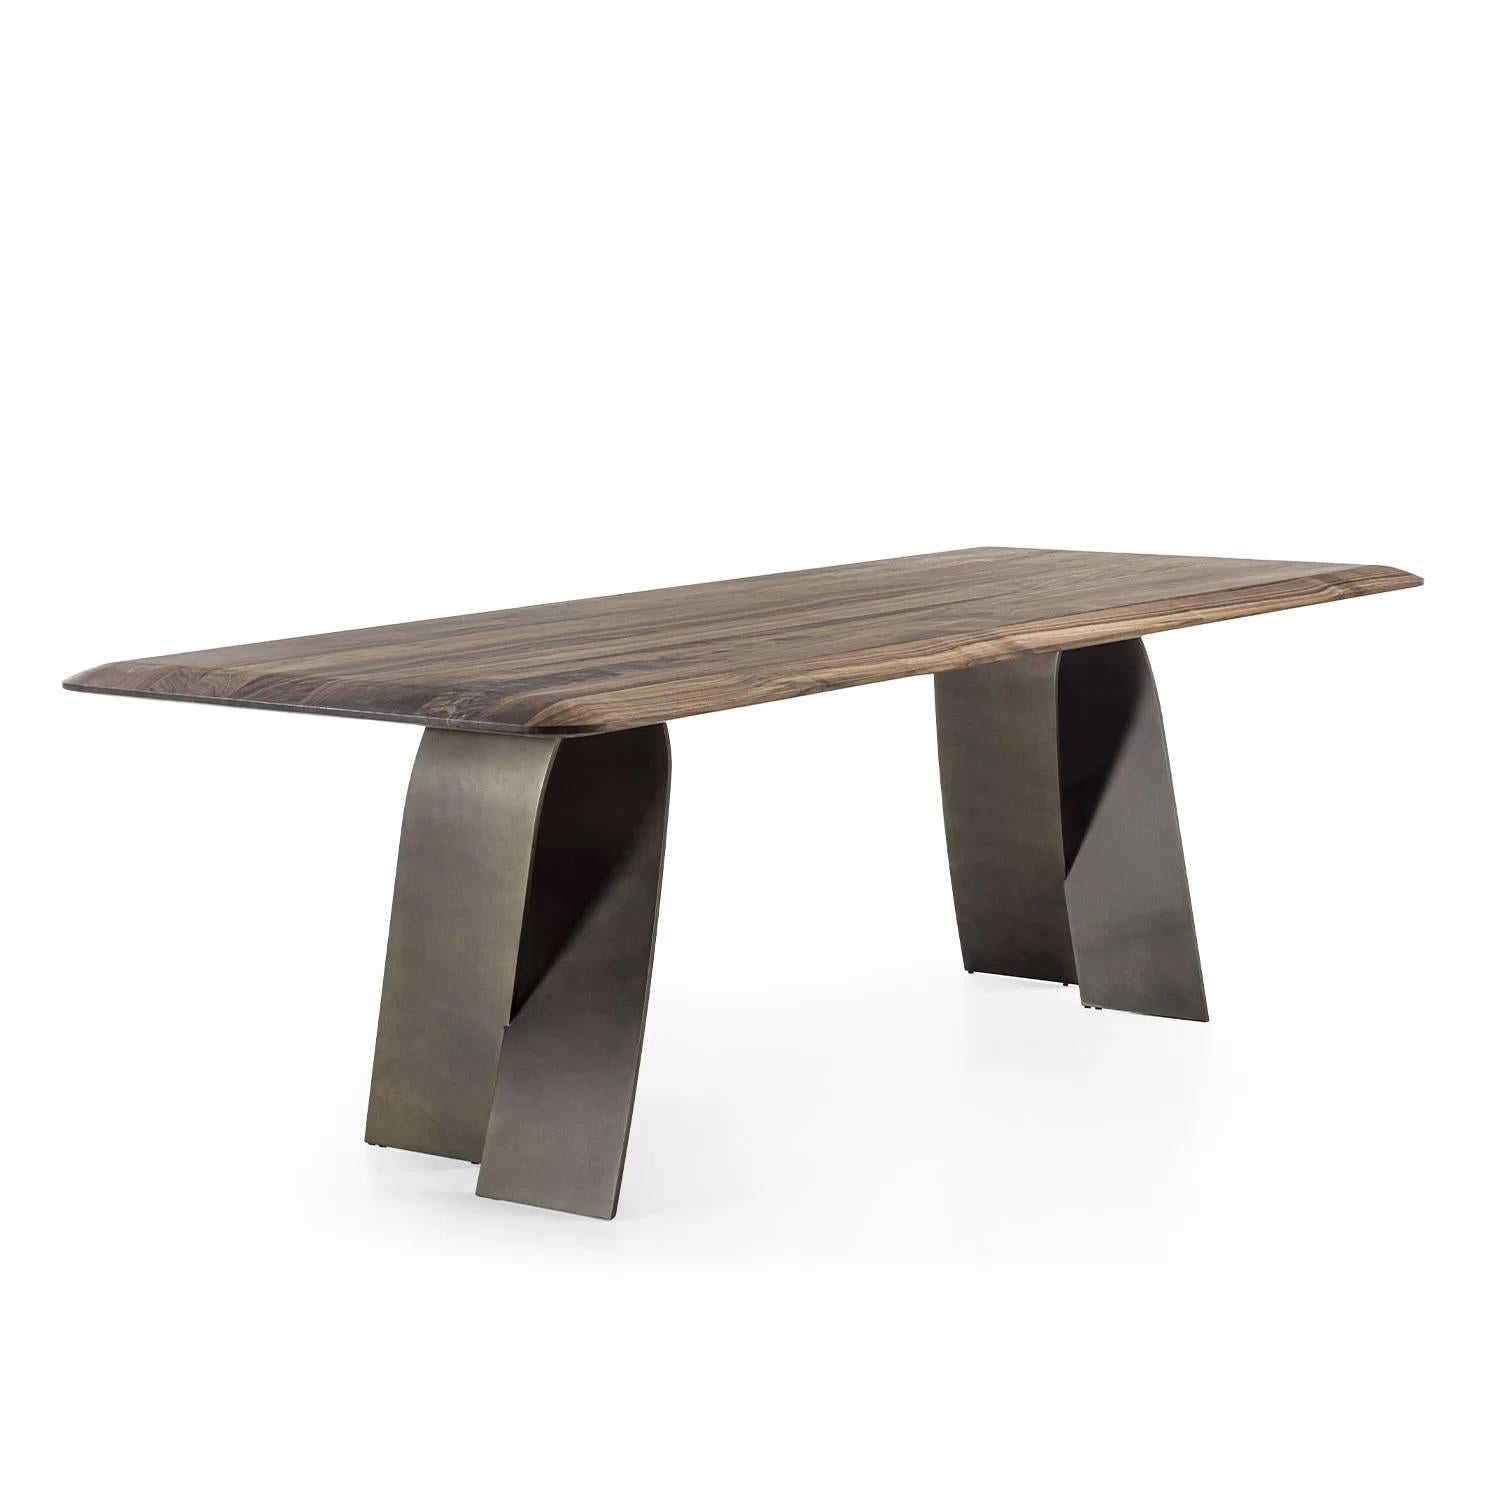 Italian Nastro Wood & Iron Dining Table, Designed by Carlesi Tonelli, Made in Italy For Sale